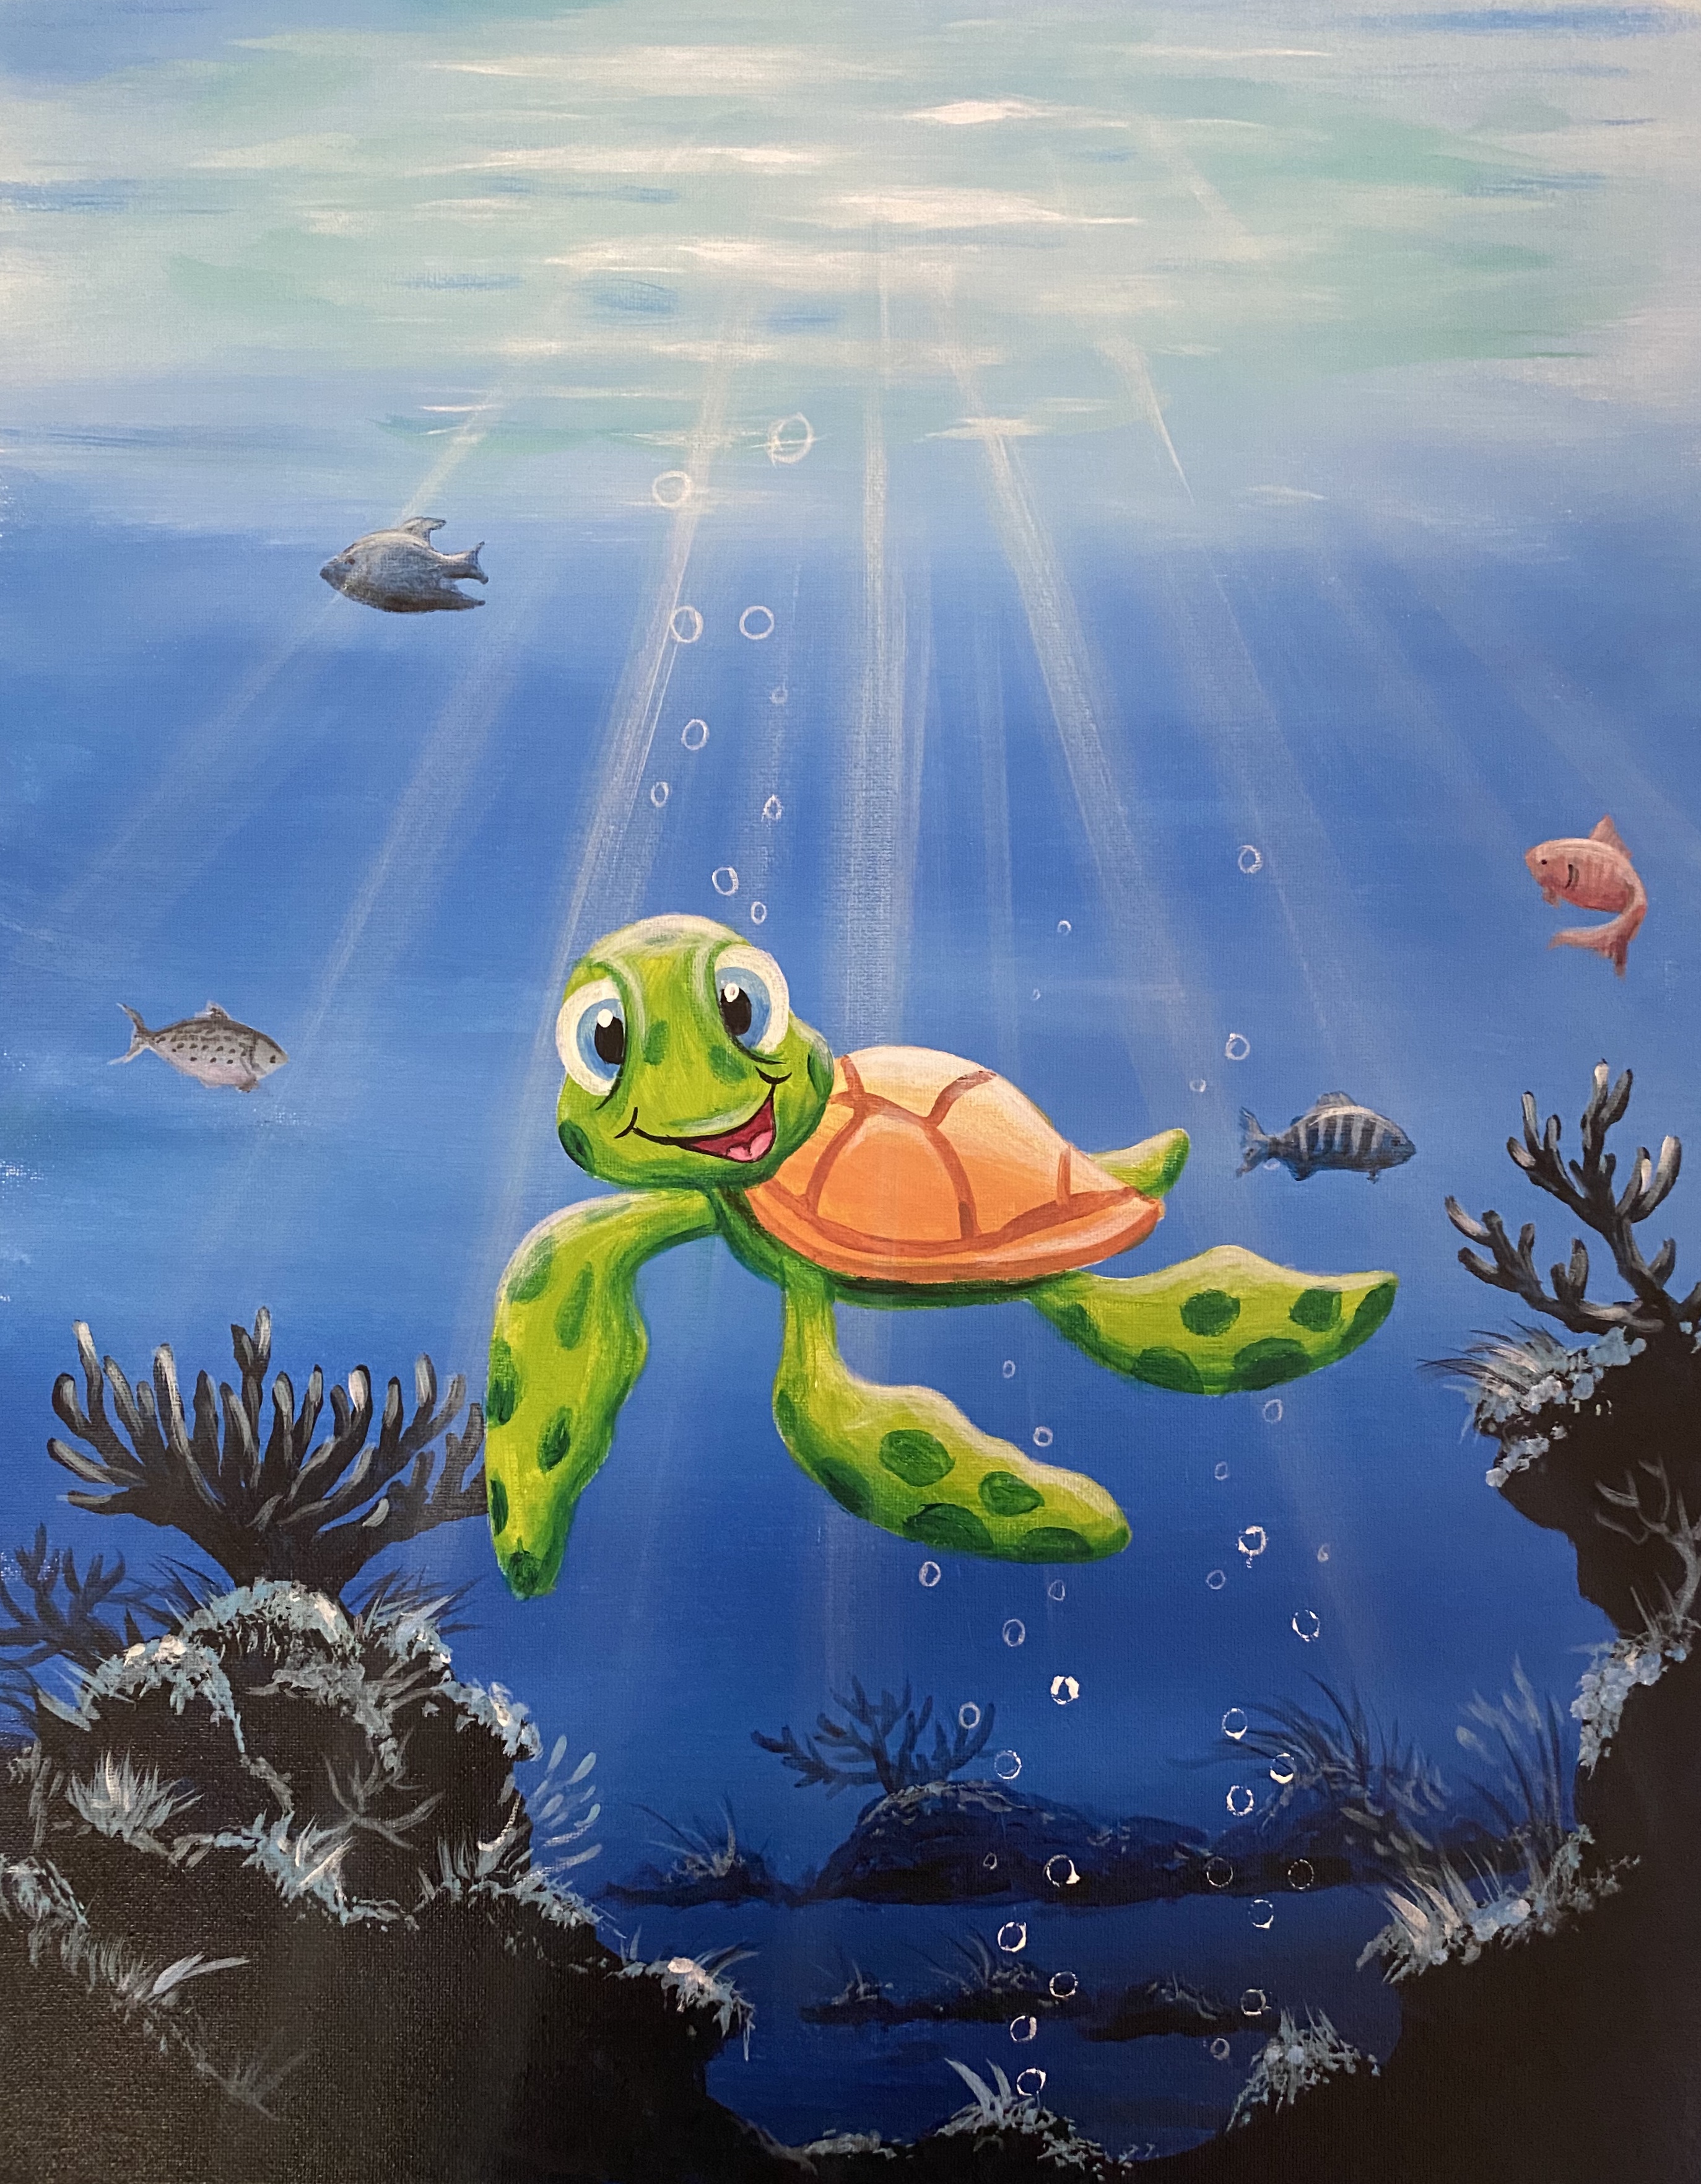 A Tully the Turtle experience project by Yaymaker